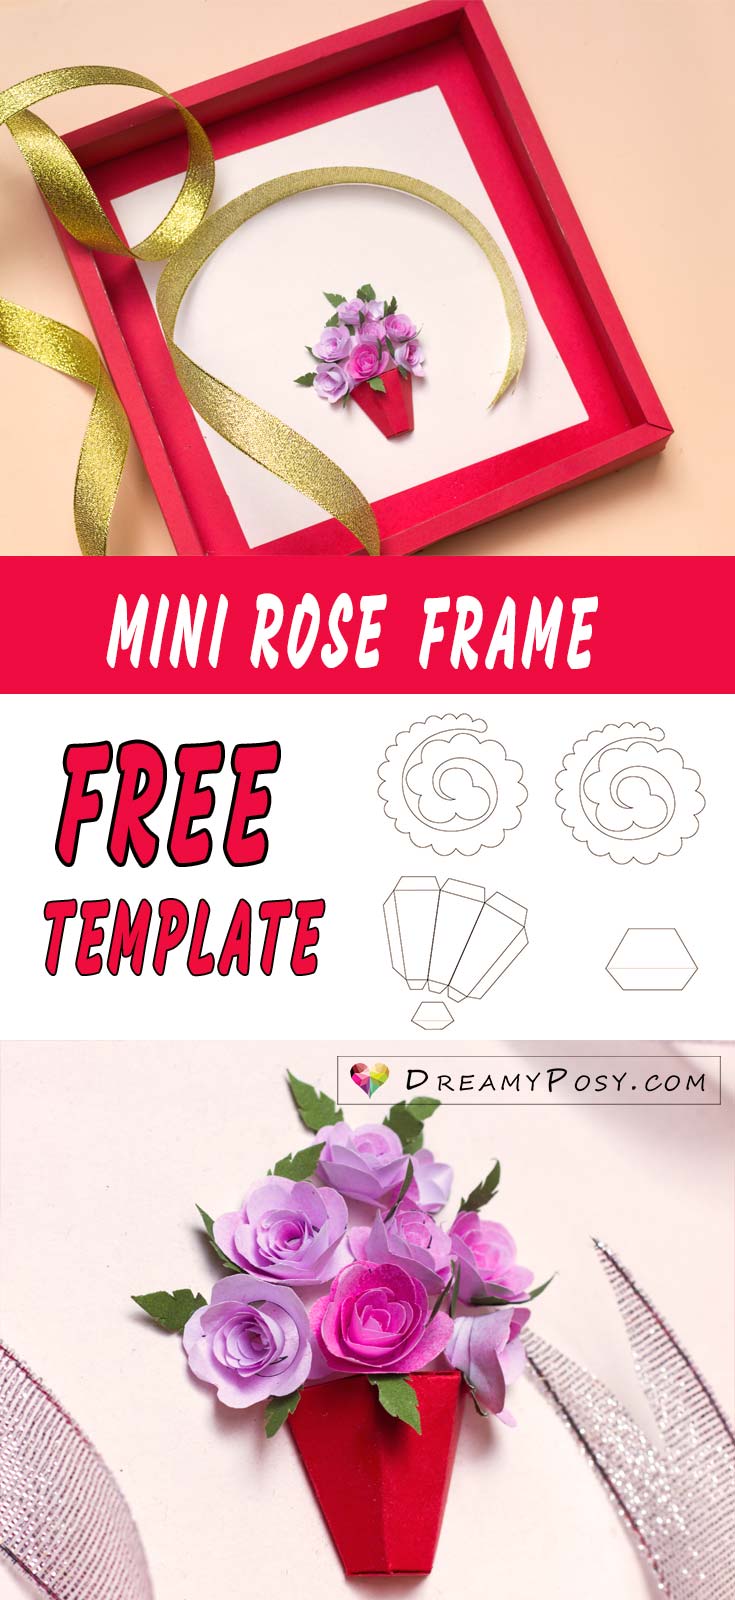 Mini rose frame free tutorial and template